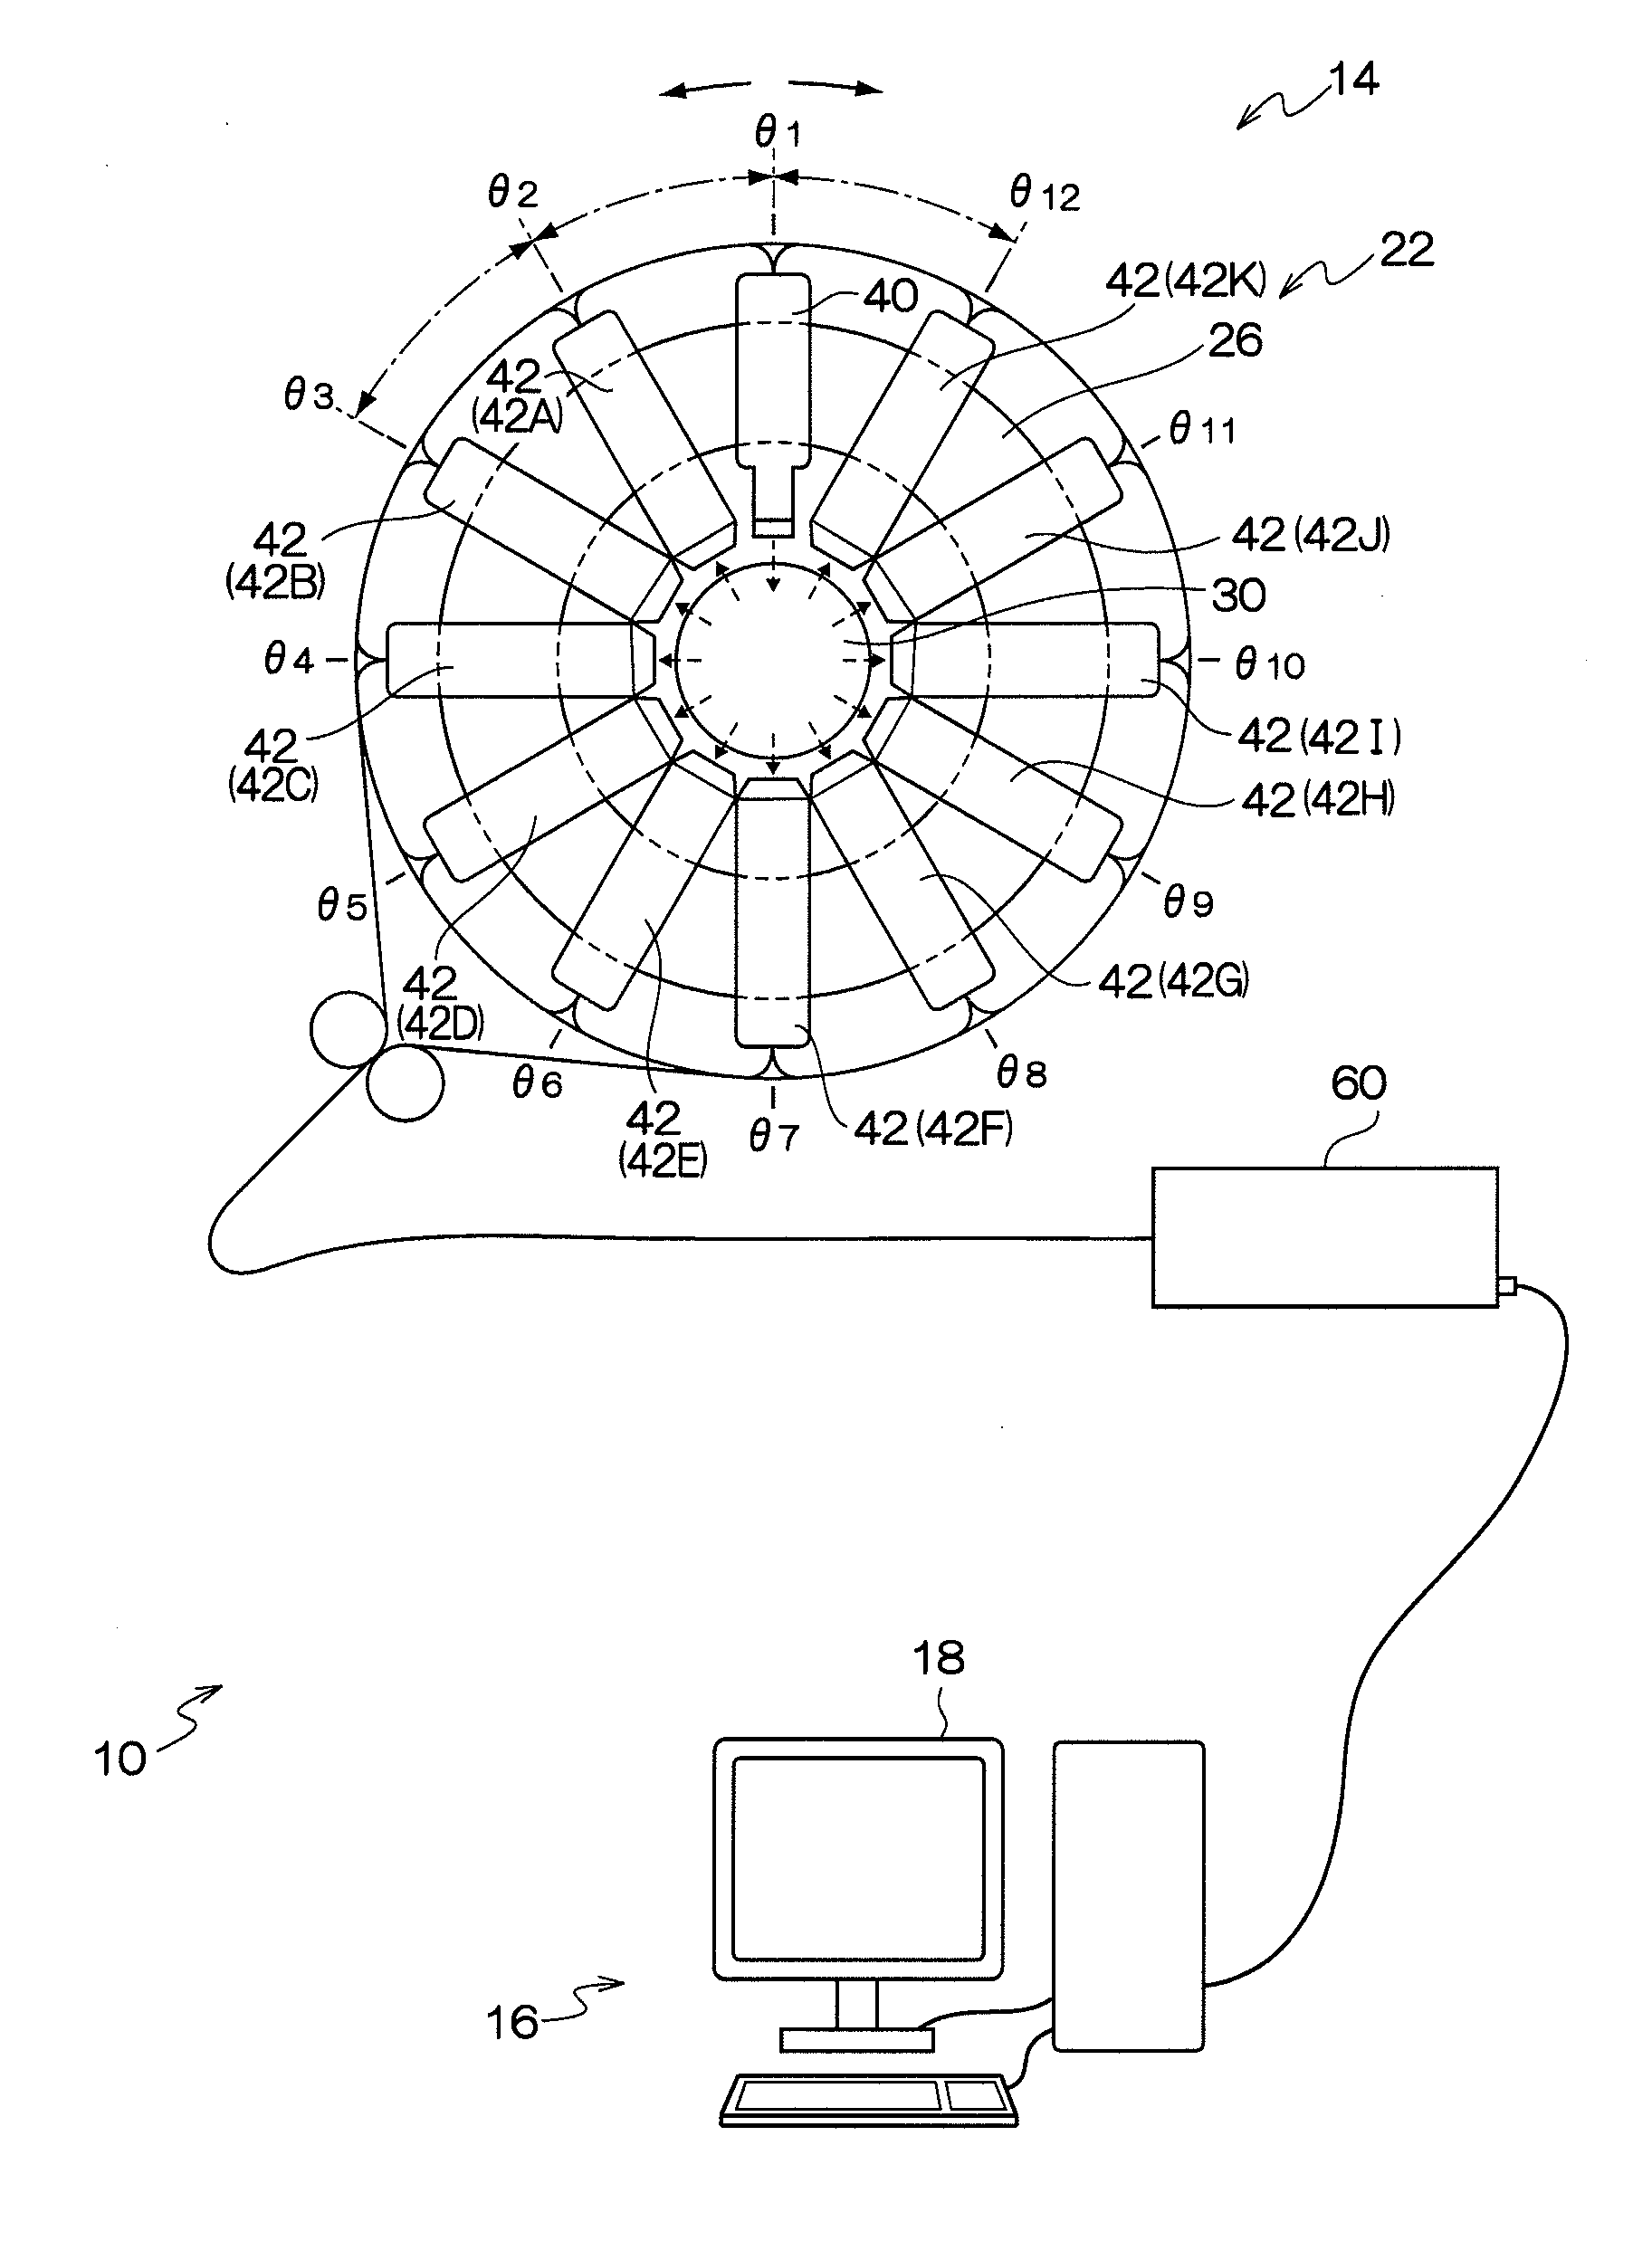 Optical tomographic measuring device